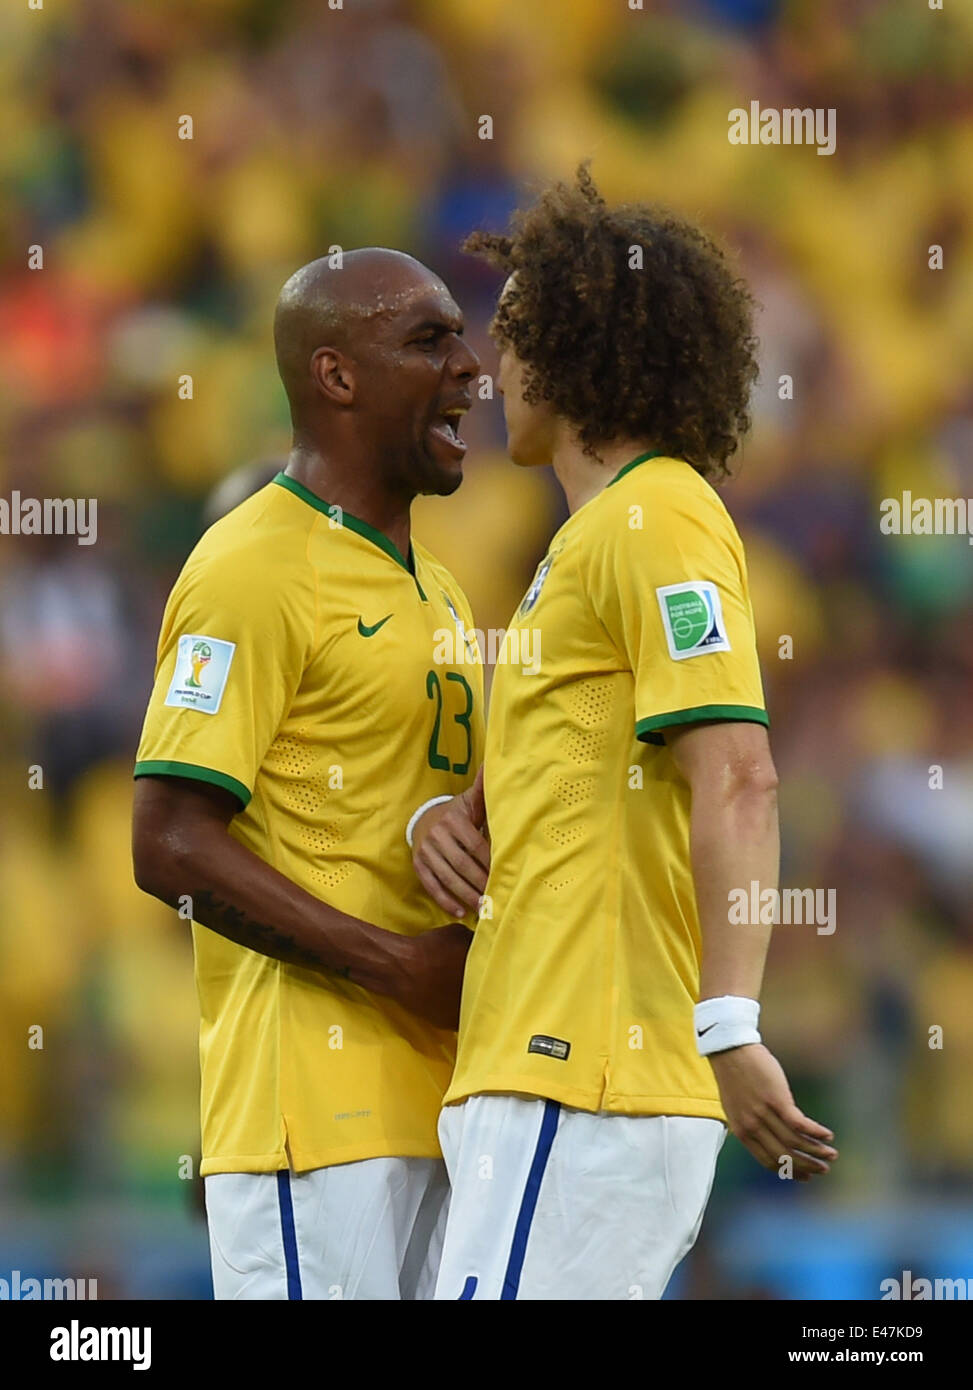 Fortaleza, Brazil. 4th July, 2014. Brazil's Maicon (L) and David Luiz celebrate a goal by Thiago Silva during a quarter-finals match between Brazil and Colombia of 2014 FIFA World Cup at the Estadio Castelao Stadium in Fortaleza, Brazil, on July 4, 2014. Credit:  Li Ga/Xinhua/Alamy Live News Stock Photo